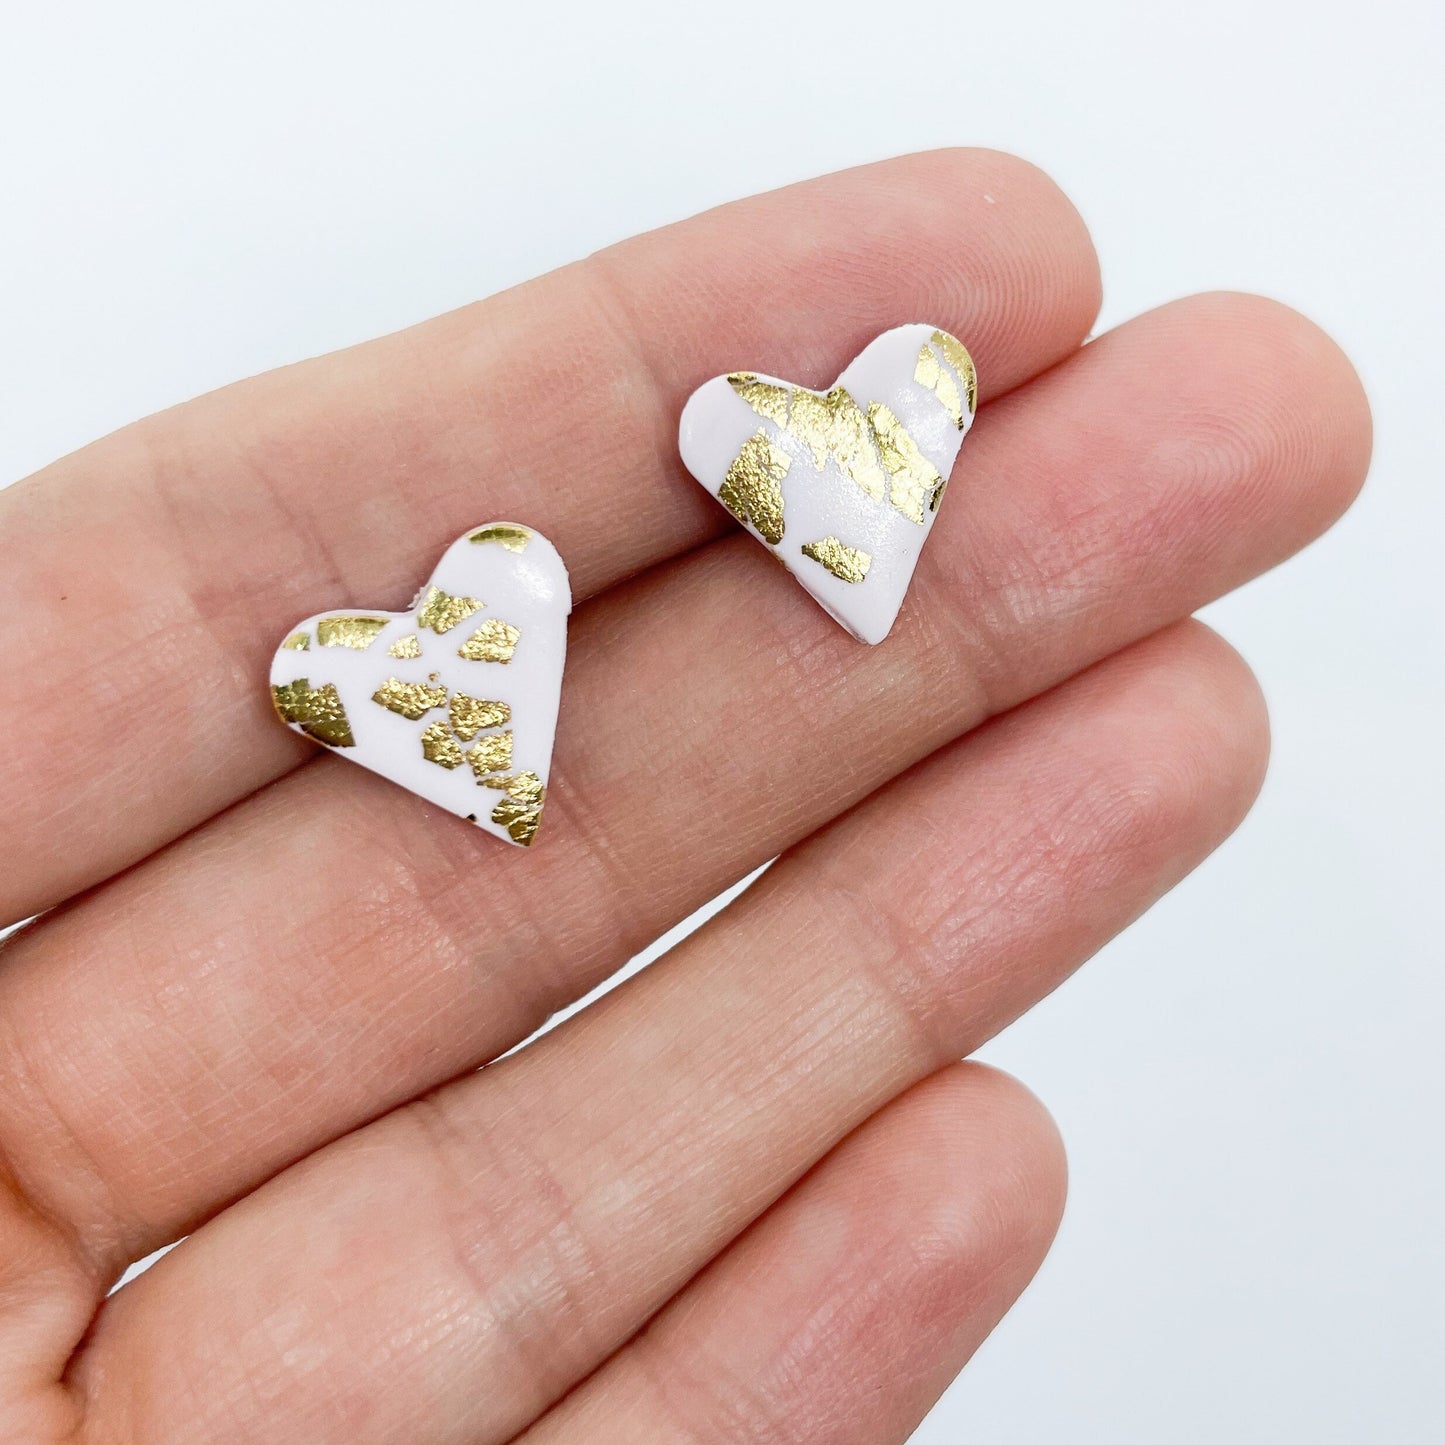 Pink and gold leaf heart earrings, polymer clay stud earrings, birthday gift, girlfriend gift, Valentine’s gift, galentine’s gift